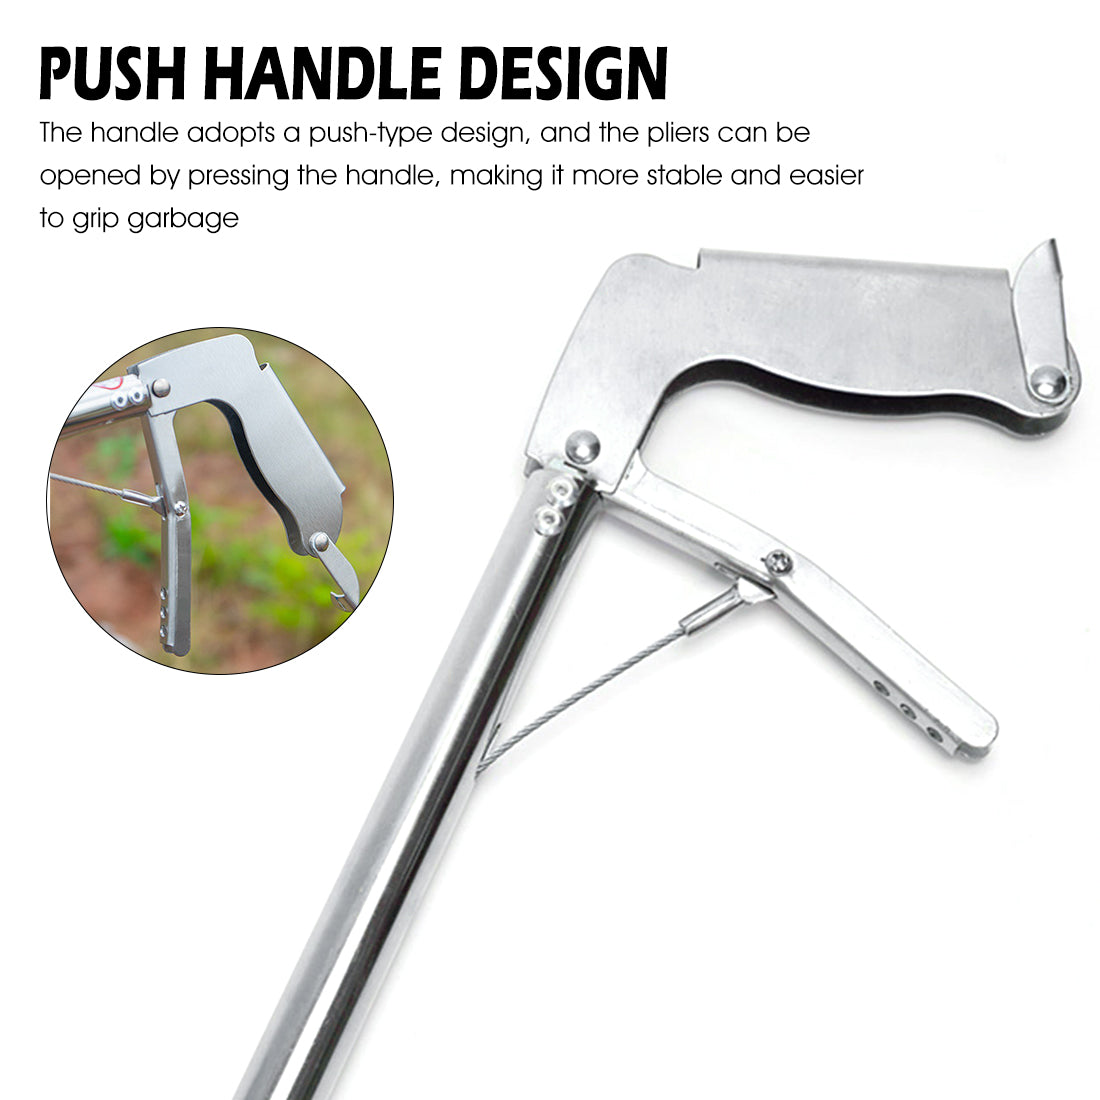 Supvox  47  Grabber Reacher Tool with Easy to Squeeze and Grip Handle for Litter Pick Trash Pick Up, Foldable Grabber Claw Pick Up Reacher Tool Assistaive Device for Elderly